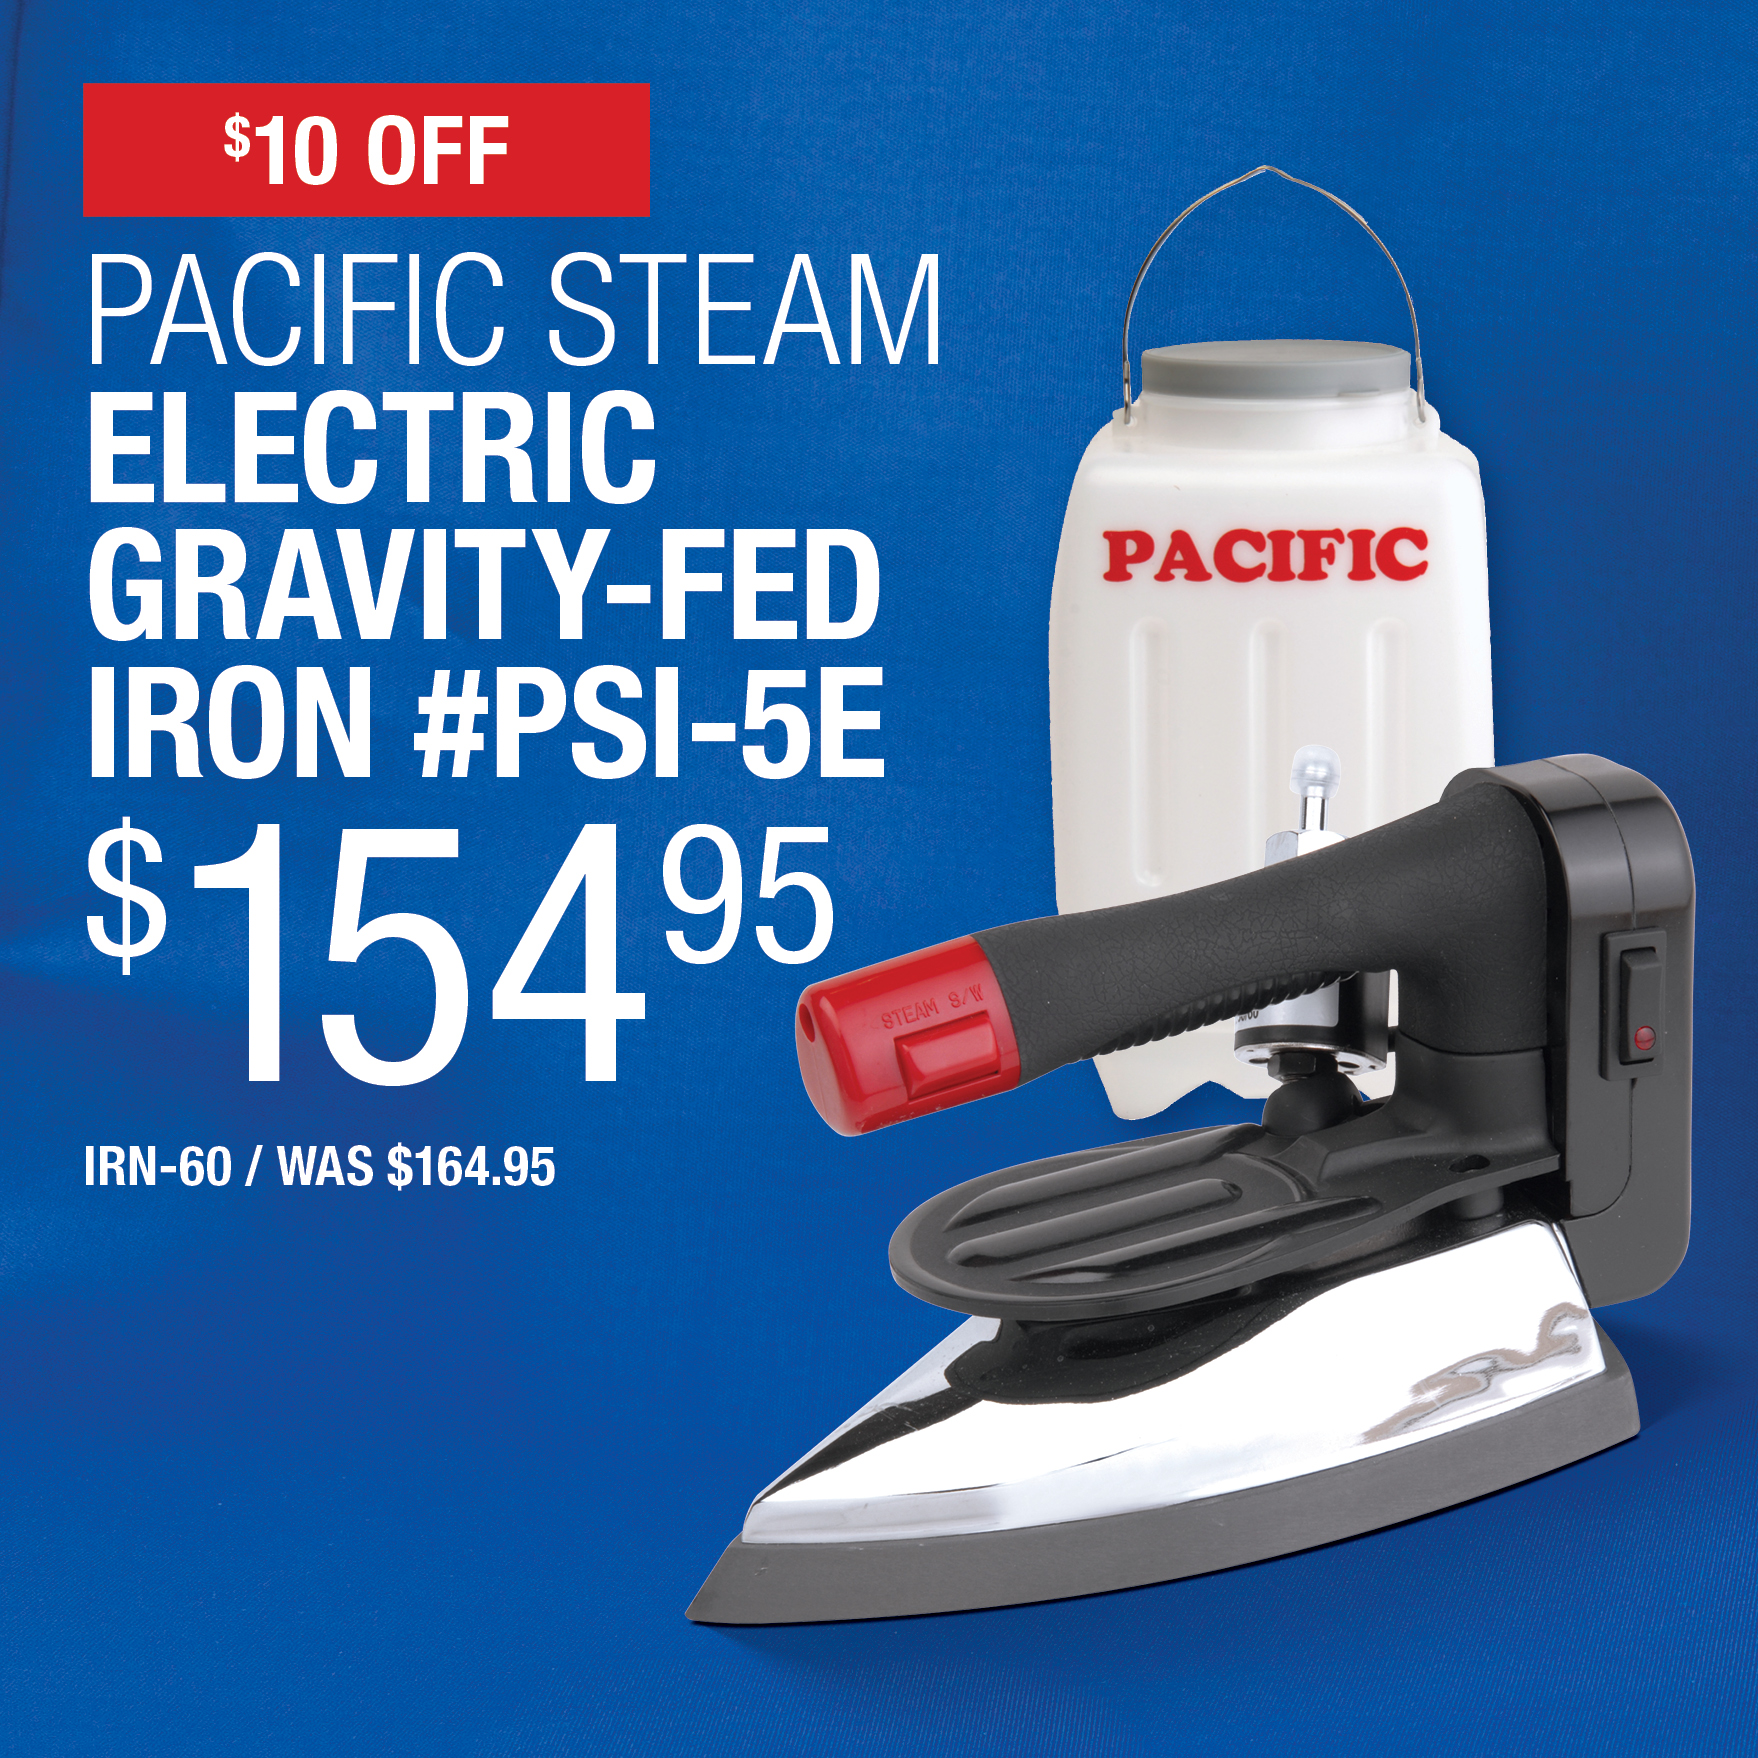 $10 Off Pacific Steam Electric Gravity-Fed Iron #PSI-5E $154.95 / IRN-60 / Was $164.95.